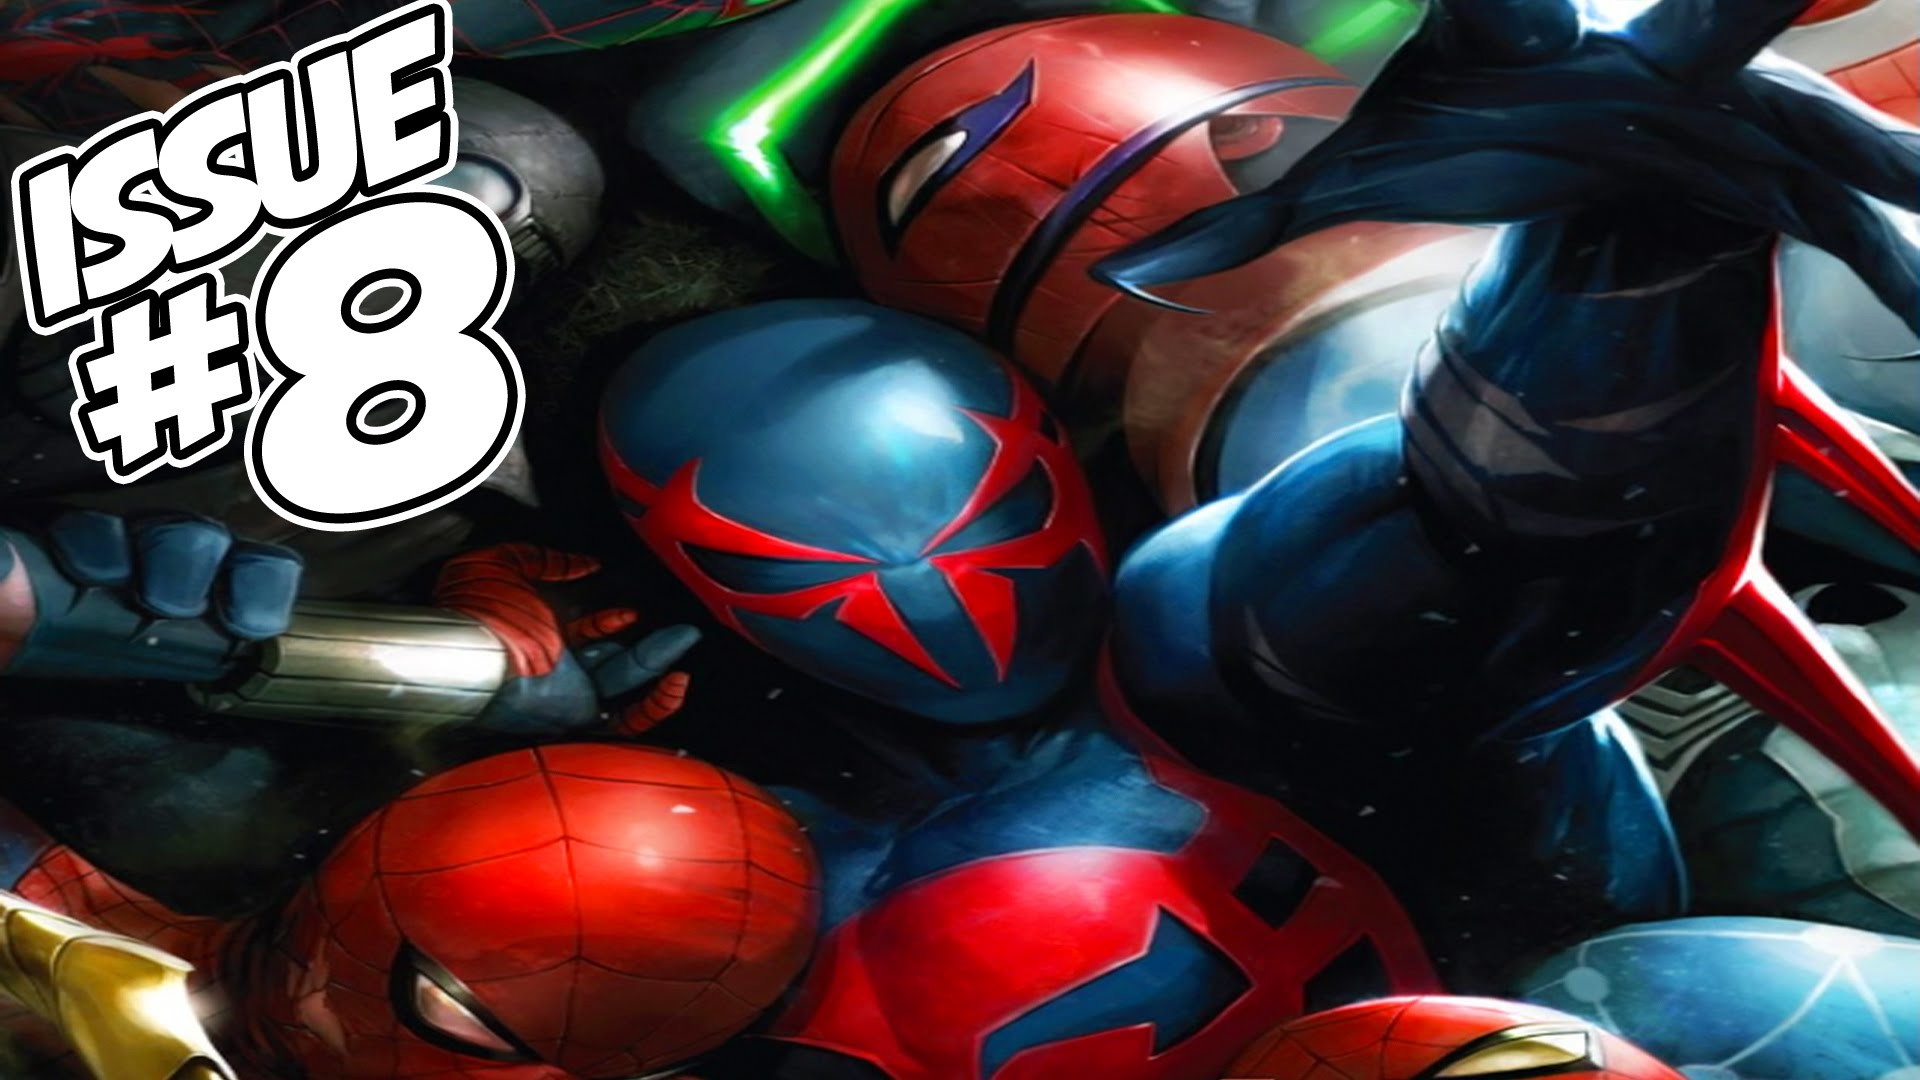 Spider-Man 2099 Issue #8 (Spider-Verse Tie-In) Full Comic Review, Giveaway  & WINNER!